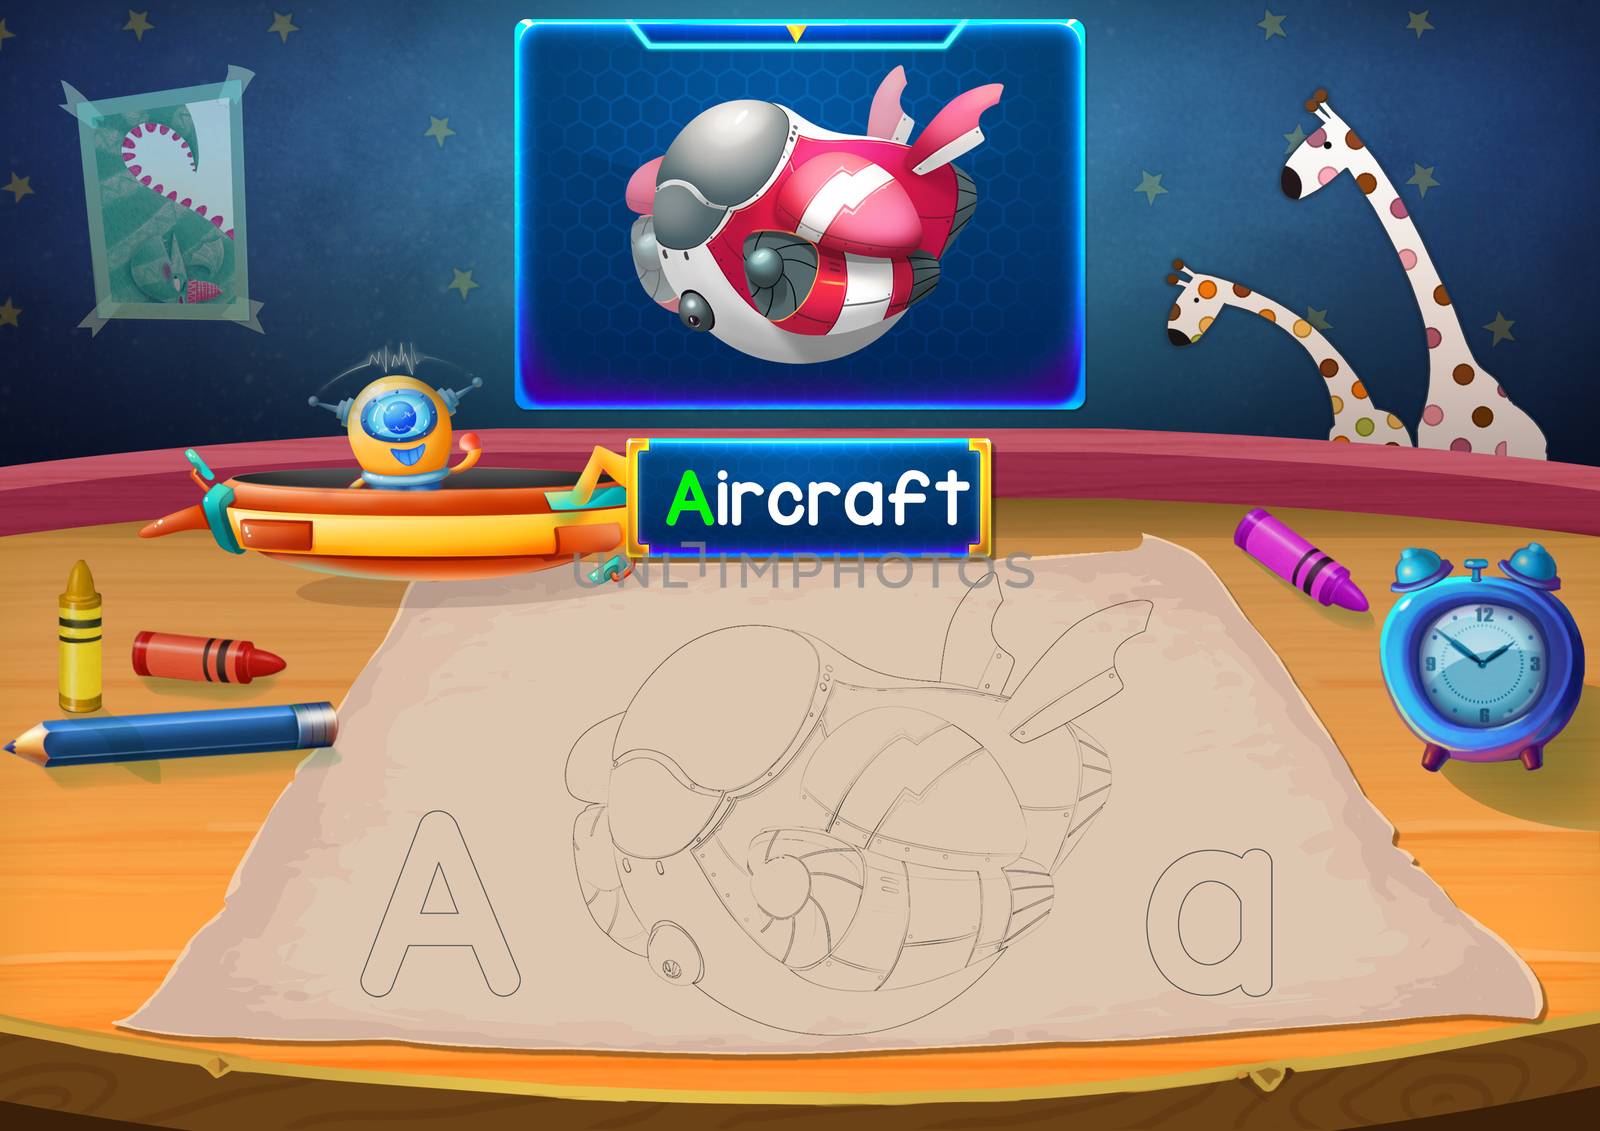 Illustration: Martian Class: A - Aircraft. The Martian in this picture opens a class for all Aliens. You must follow and use crayons coloring the outlines below. Fantastic Sci-Fi Cartoon Scene Design